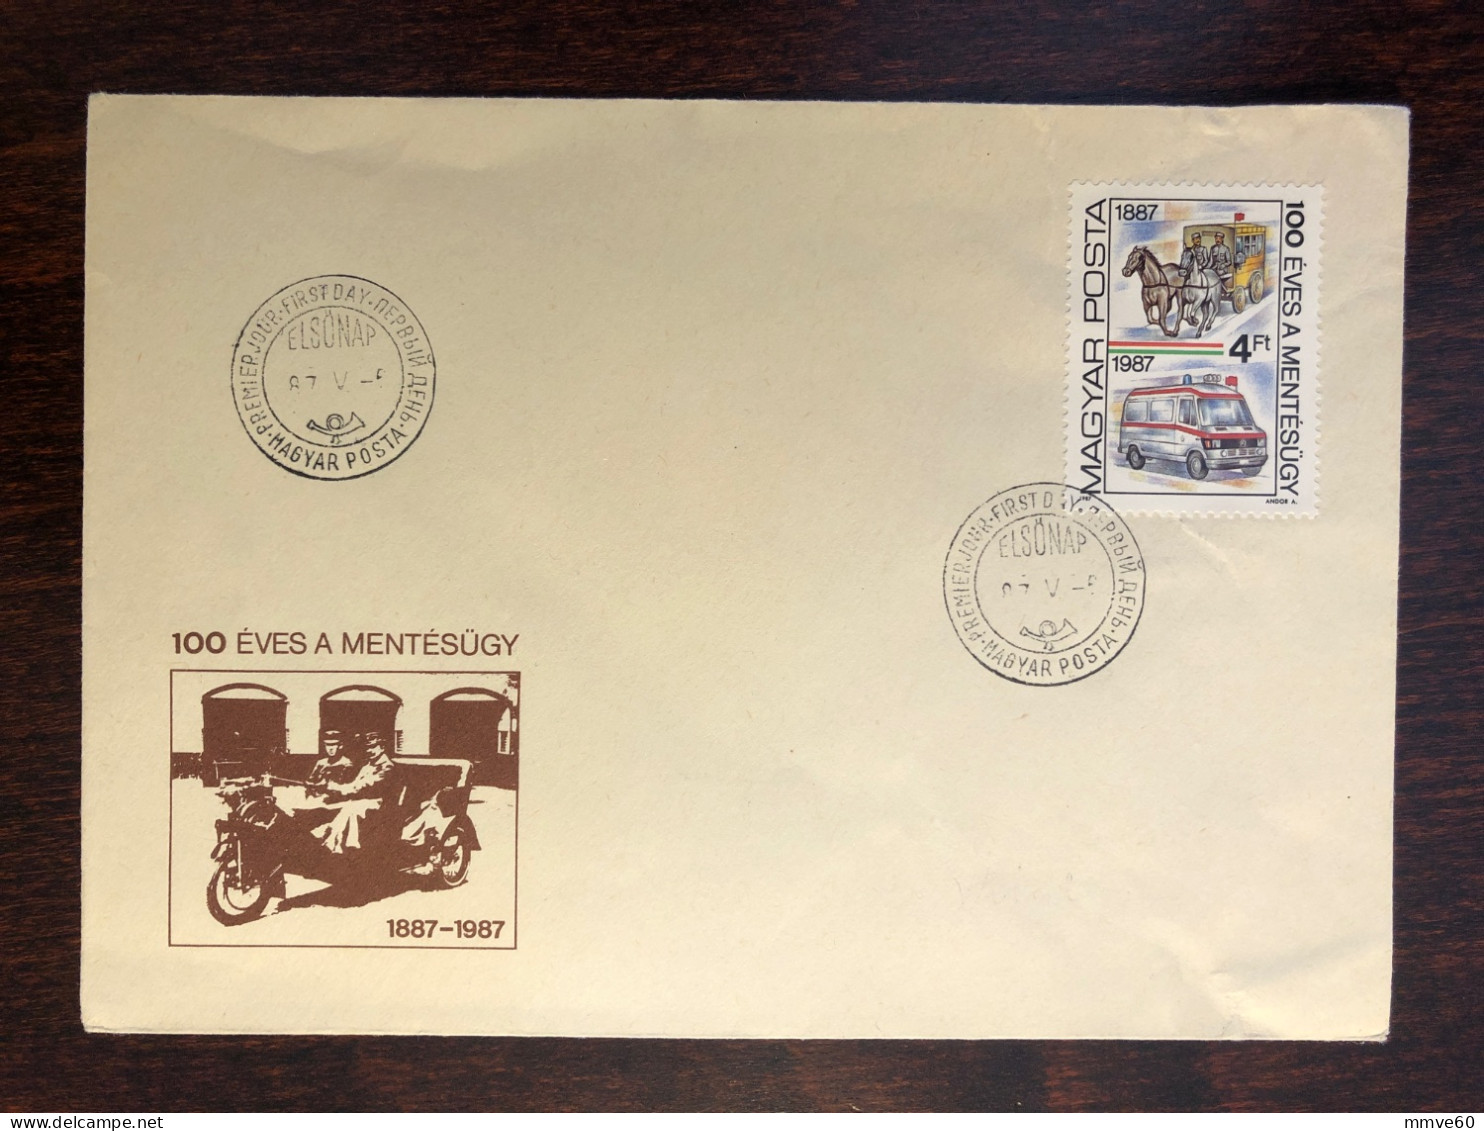 HUNGARY FDC COVER 1987 YEAR AMBULANCES HEALTH MEDICINE STAMPS - FDC